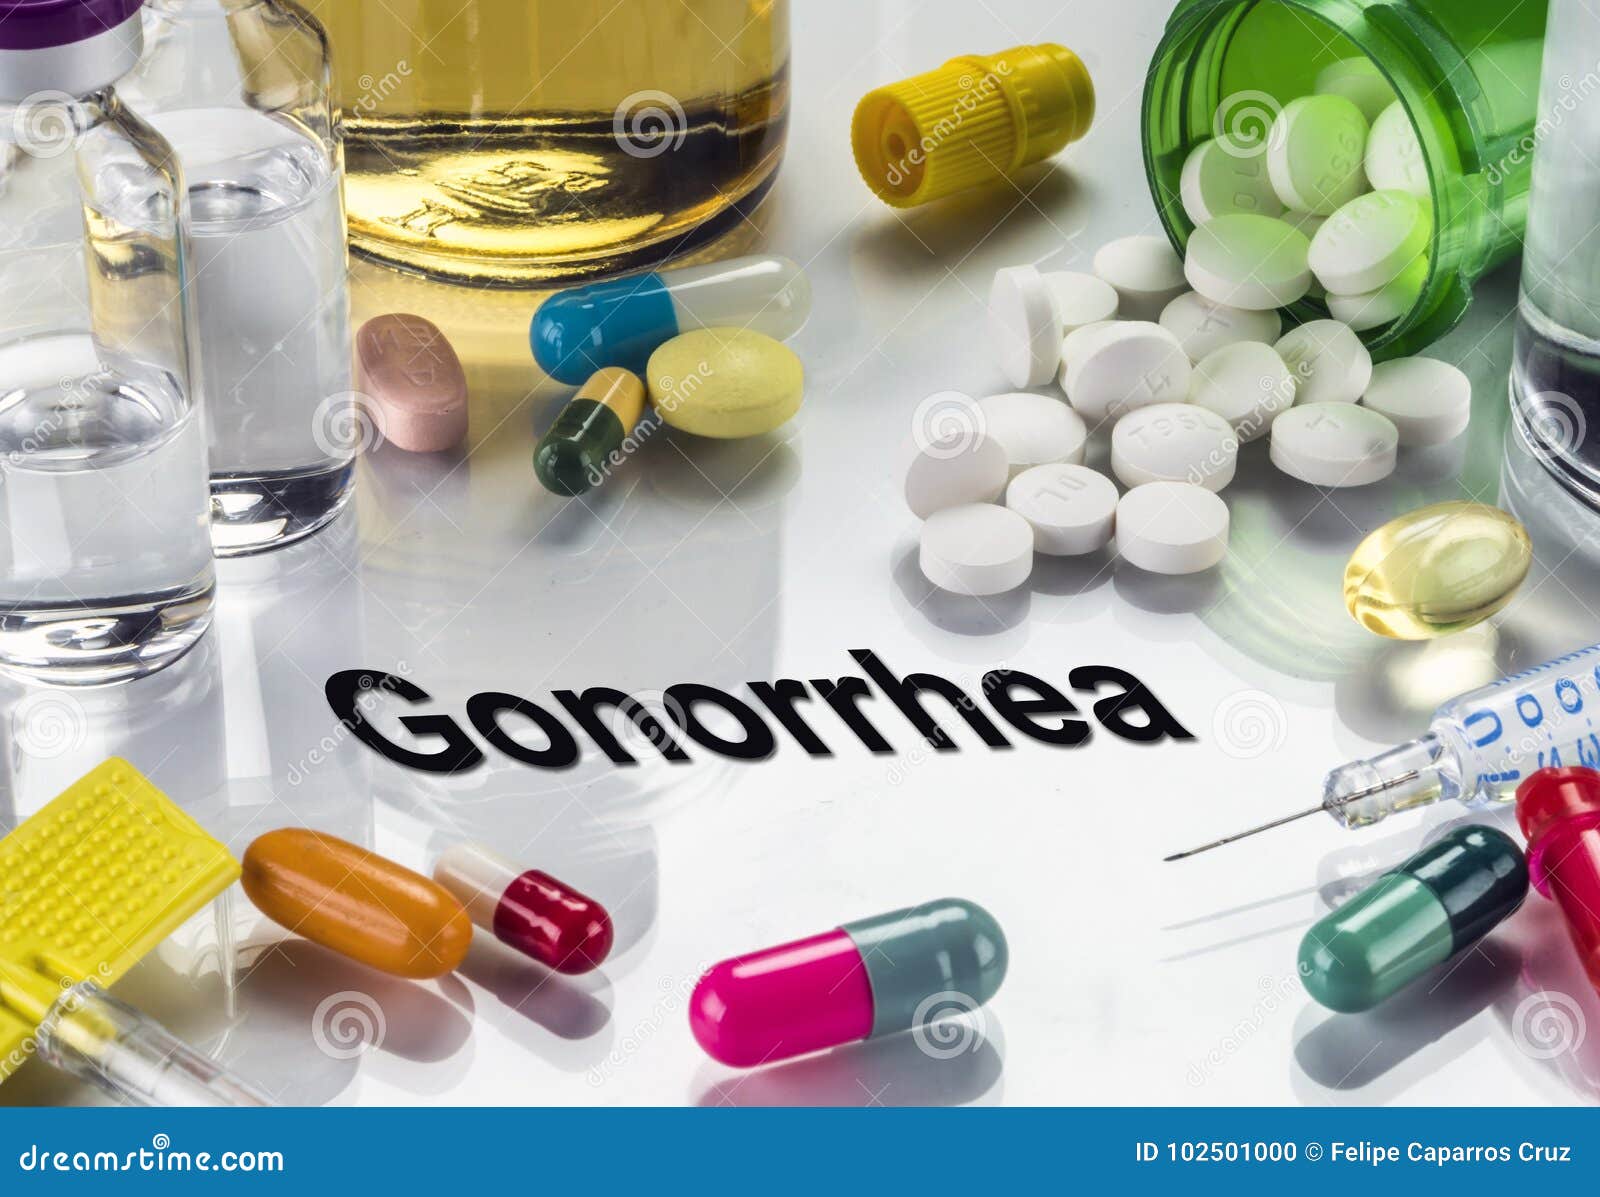 treatment for gonorrhea